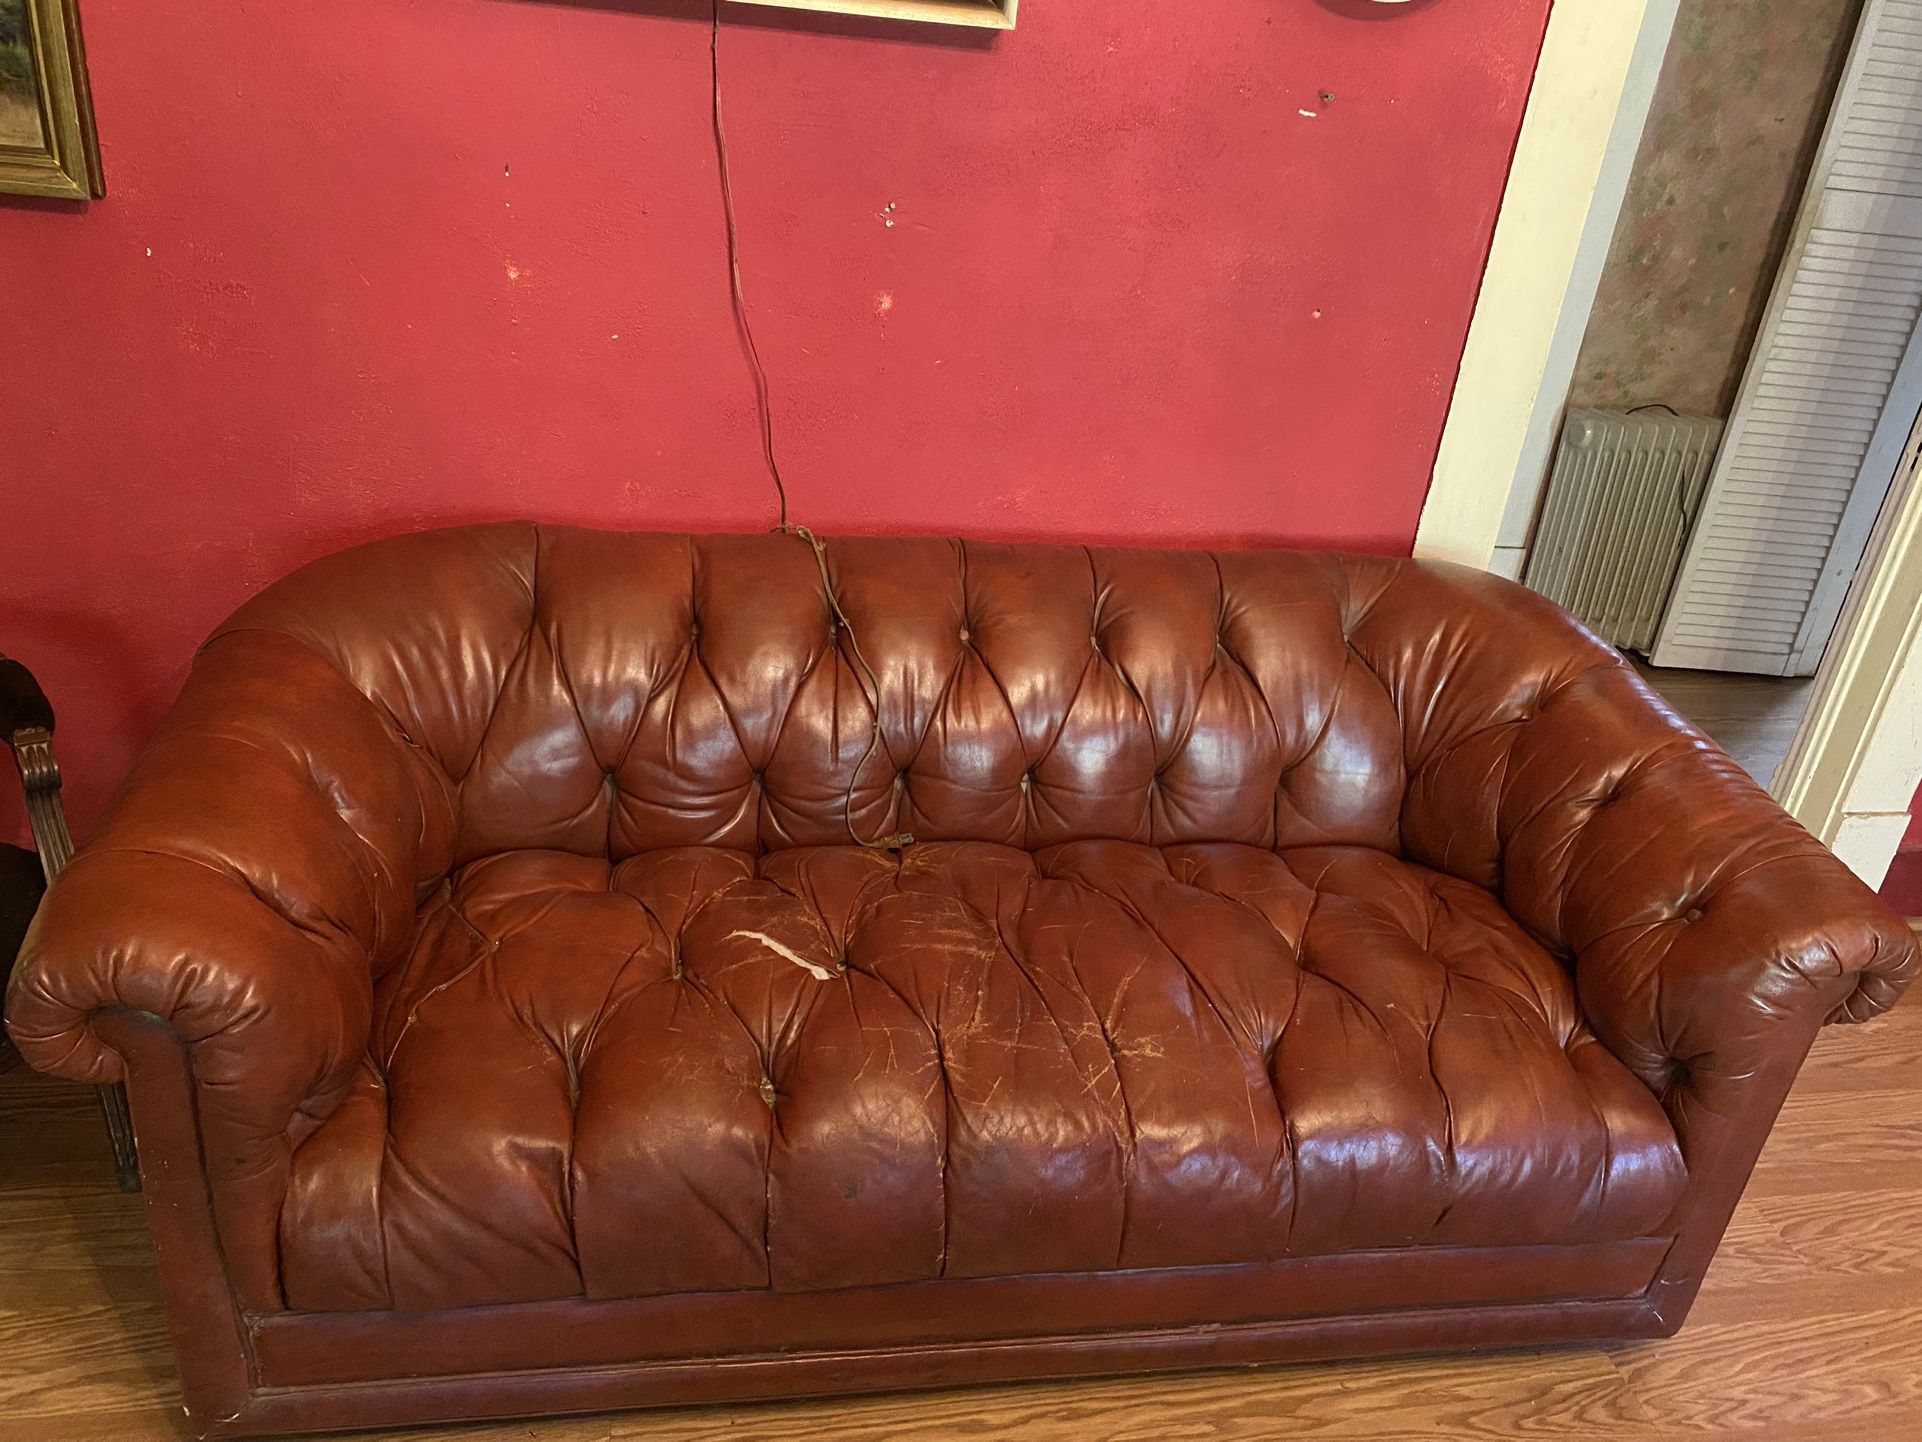 FREE!!! Vintage Leather Couch